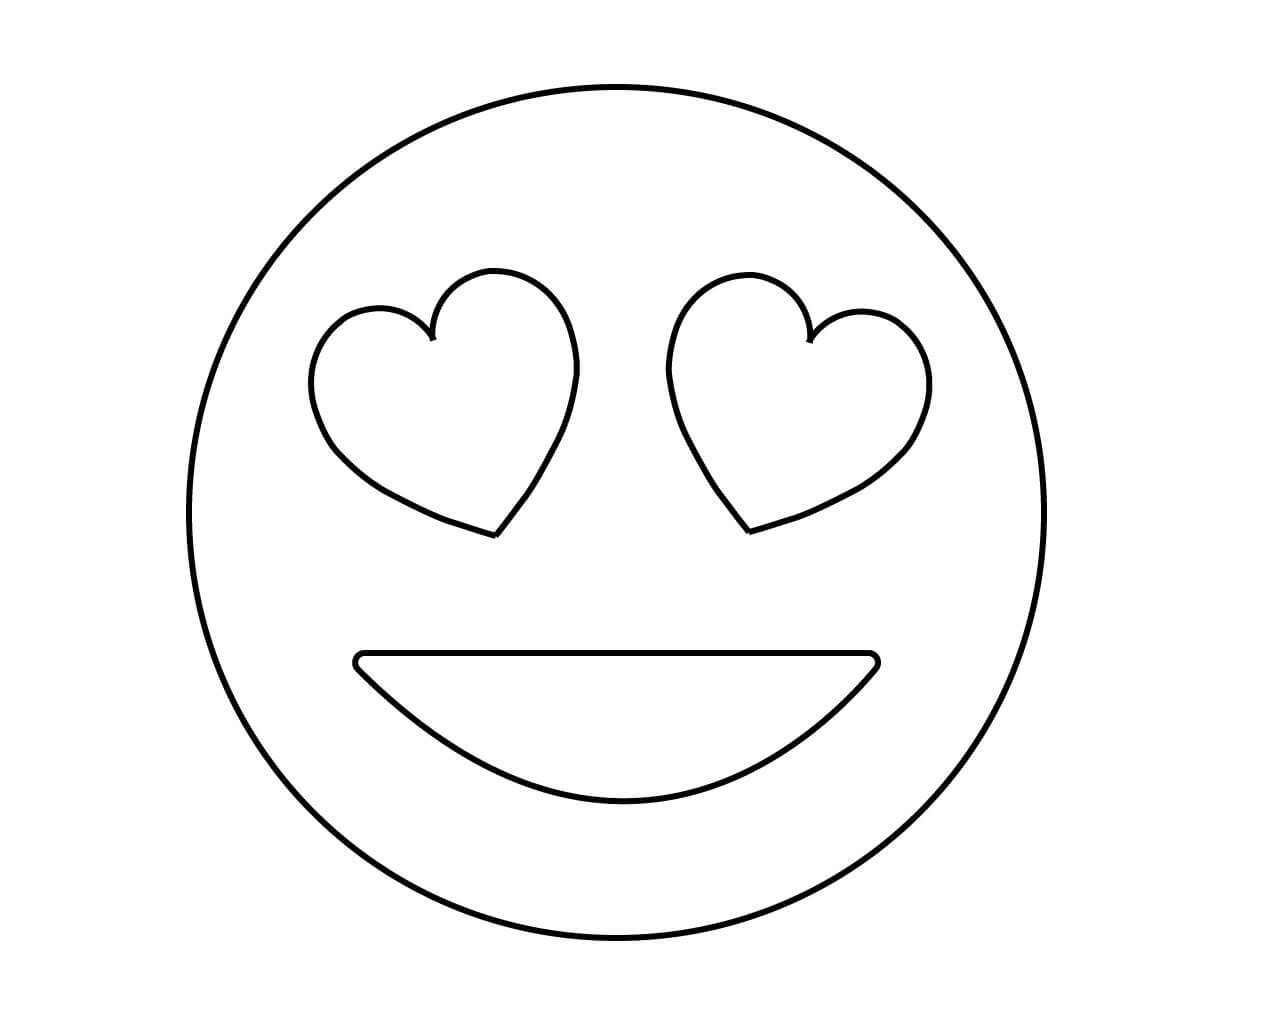 Print Emoji Emoticon List Coloring Pages Free Coloring Pages My Xxx Hot Girl